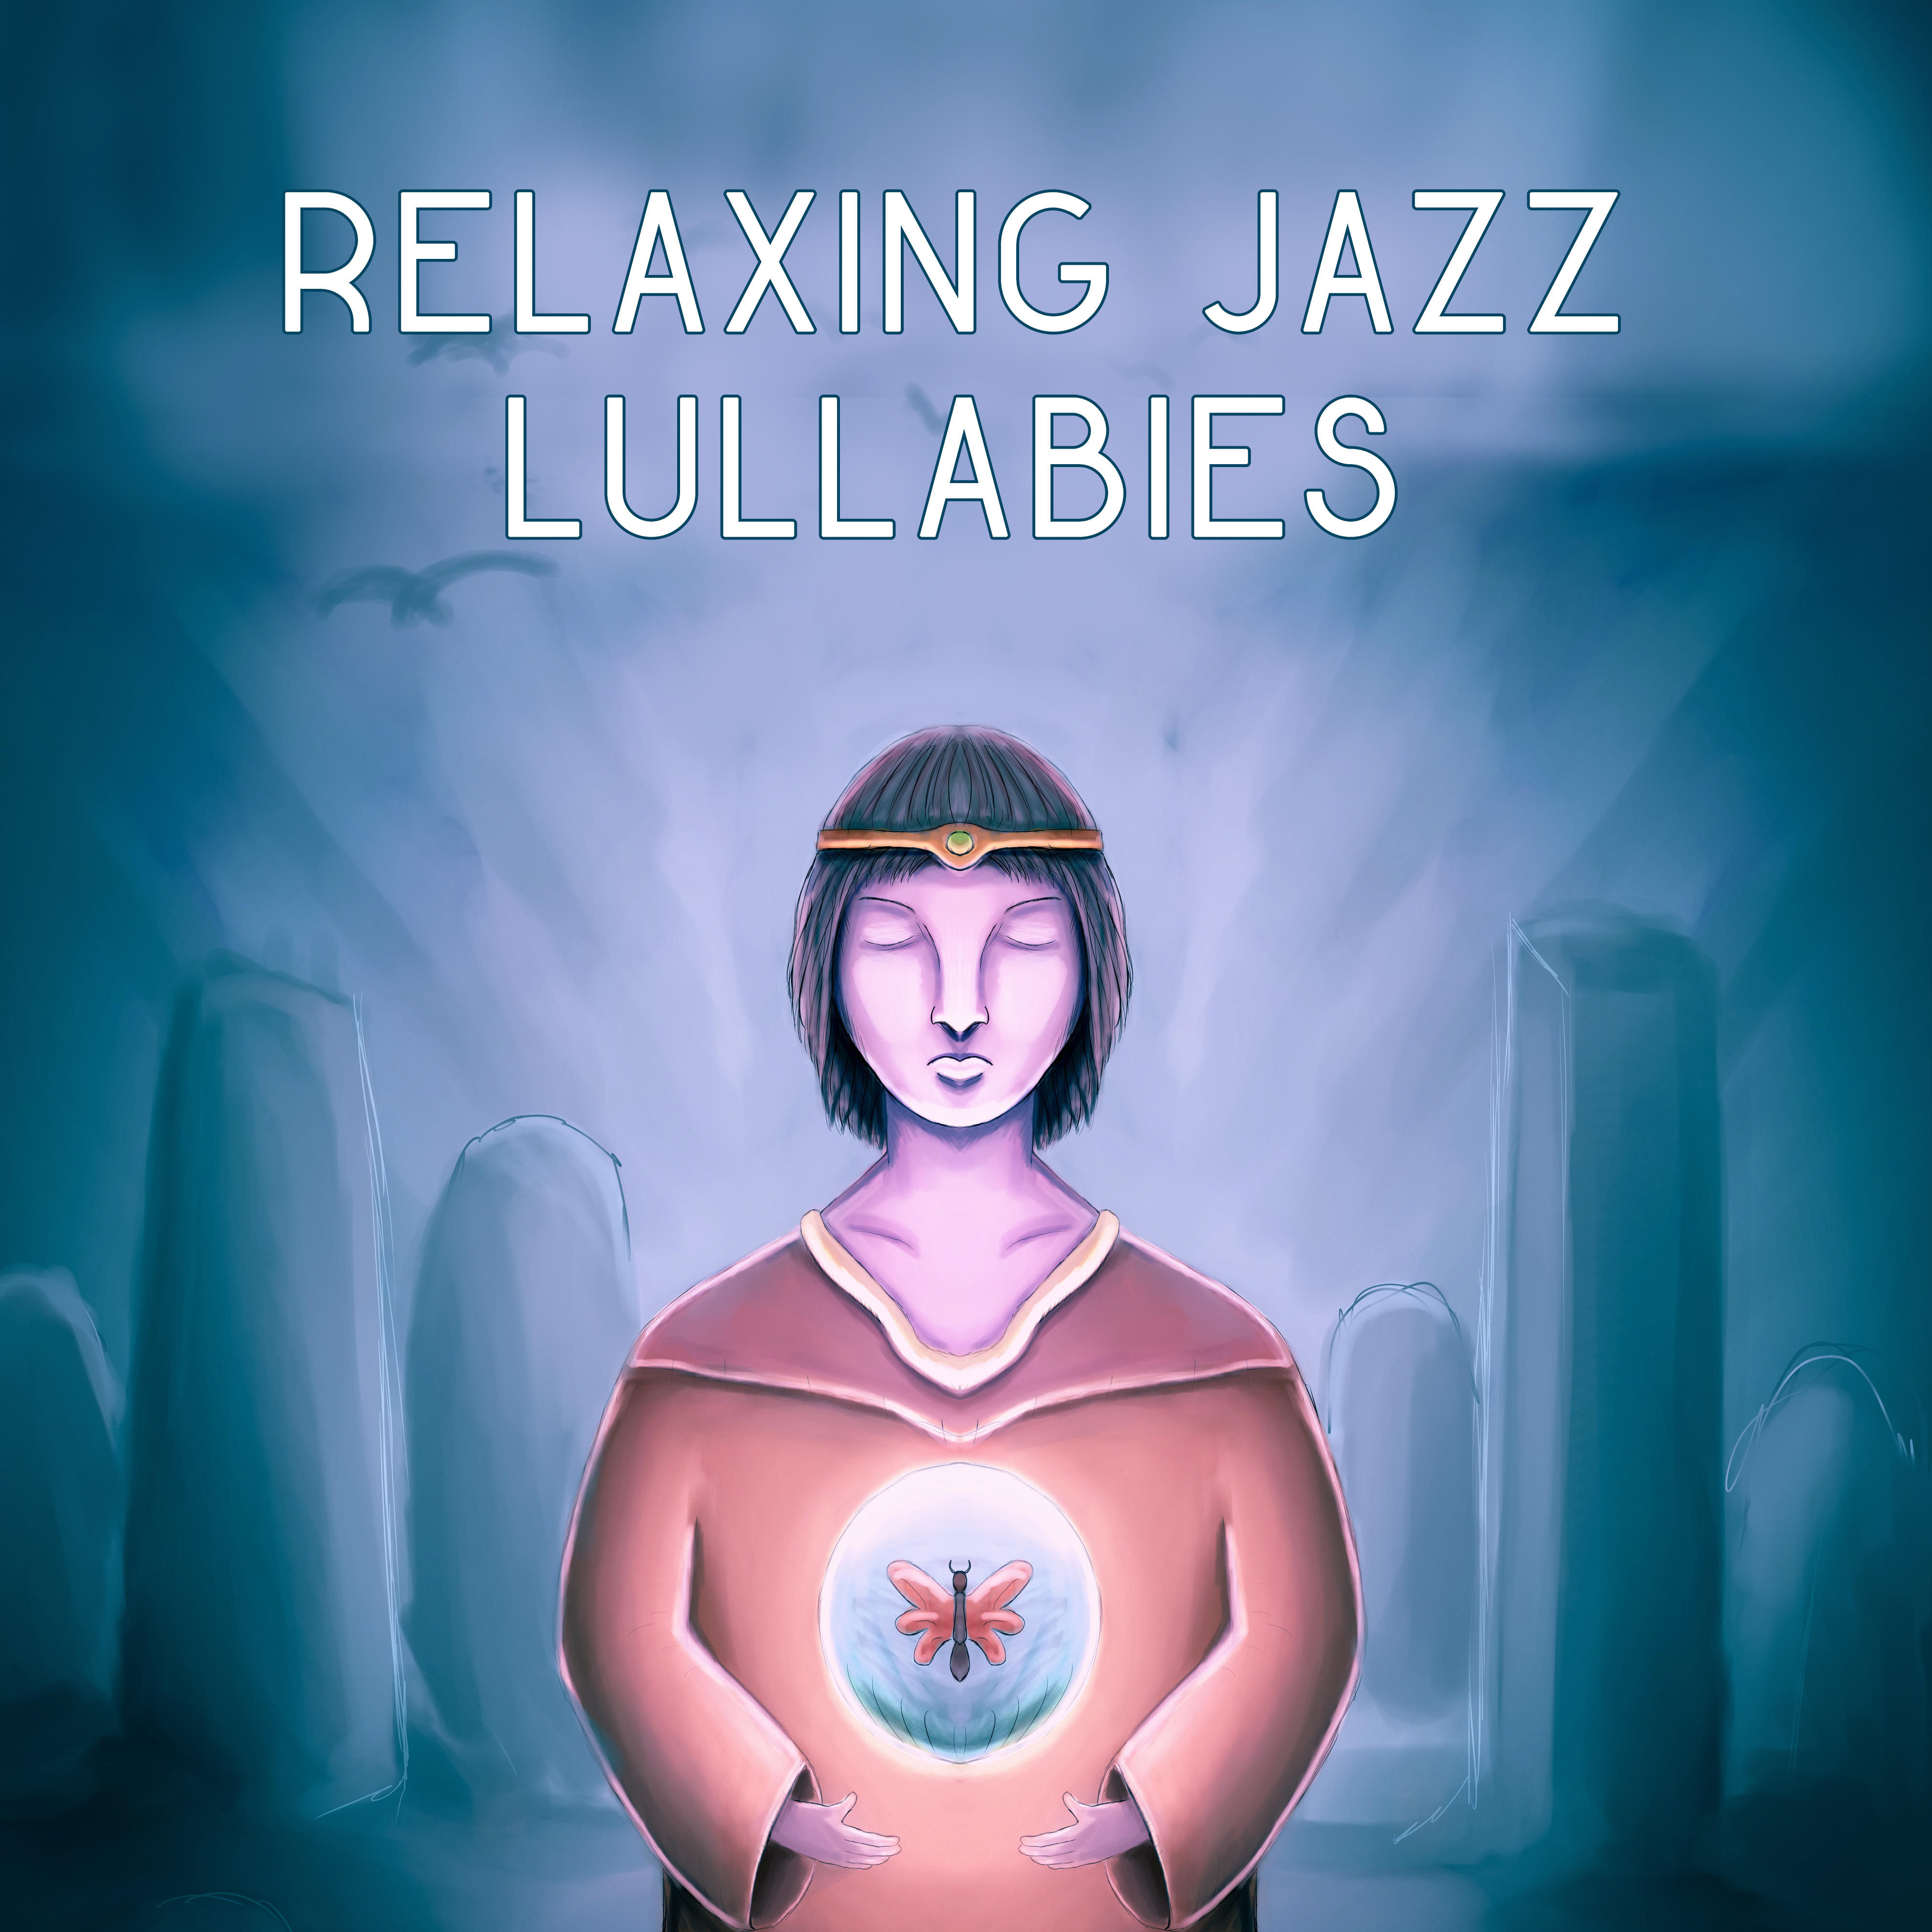 Relaxing Jazz Lullabies  Mellow Jazz, Relaxed Jazz, Peaceful Piano Melodies, Ambient Instrumental Music